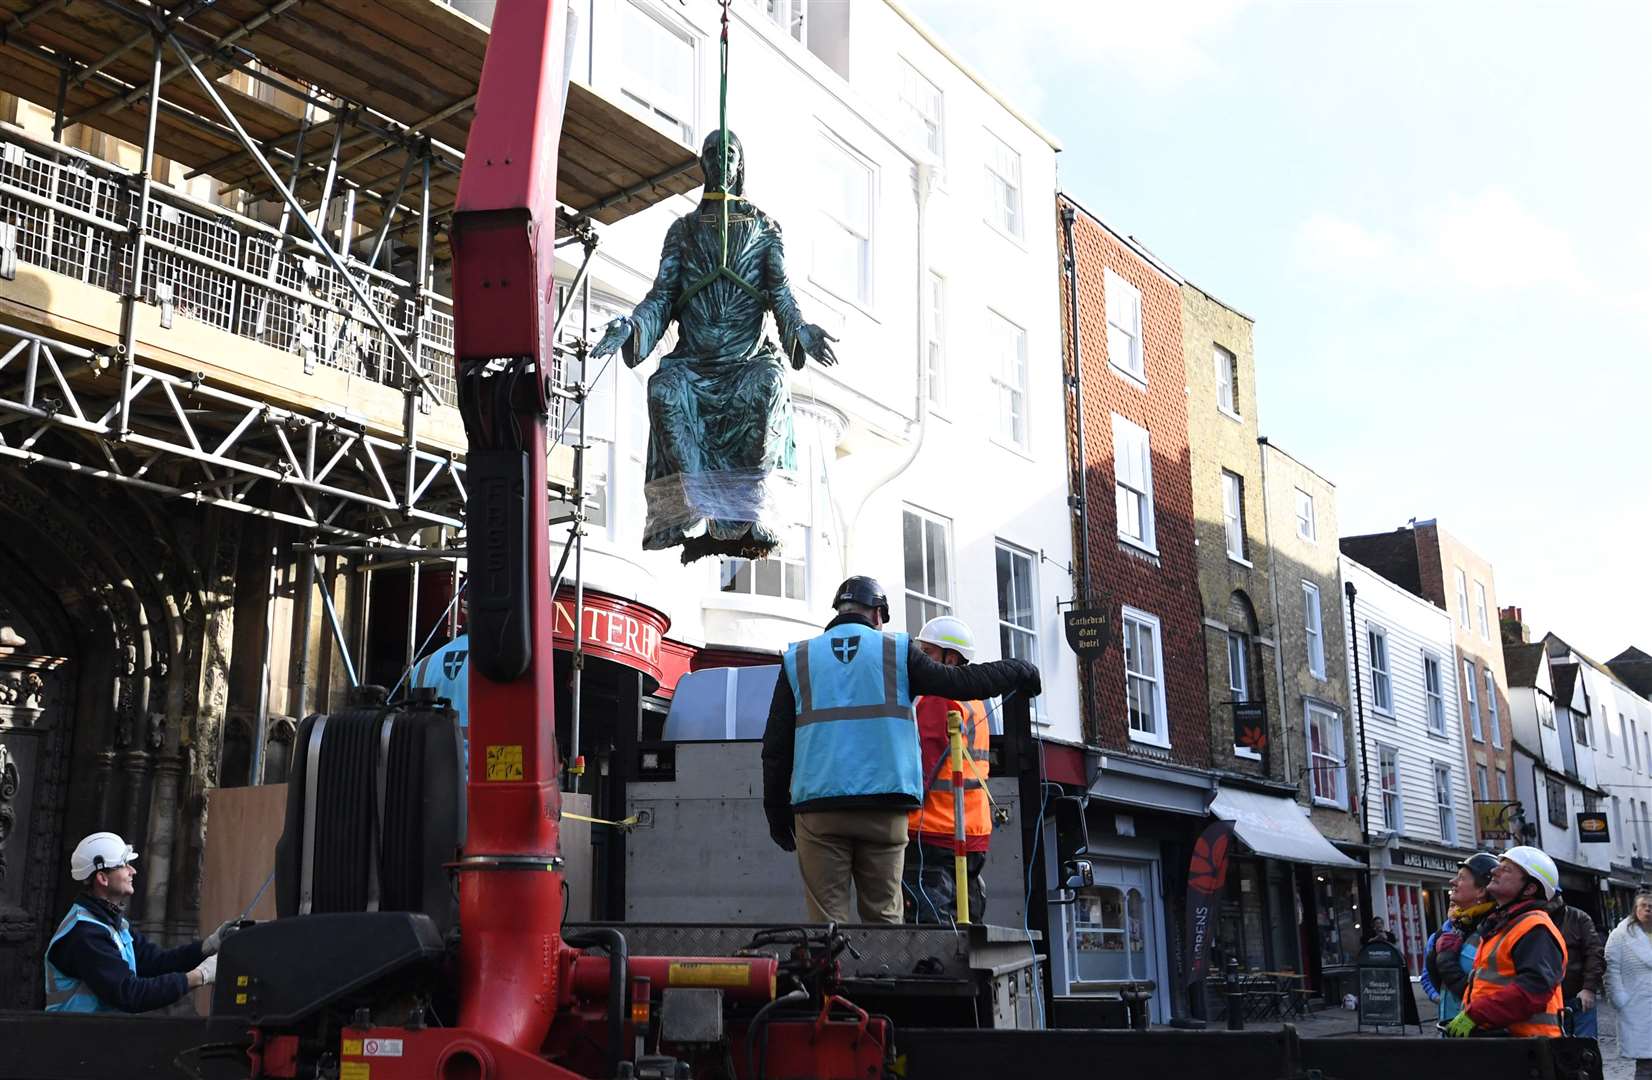 The striking statue was removed from the cathedral's entrance this morning. Picture: Canterbury Cathedral